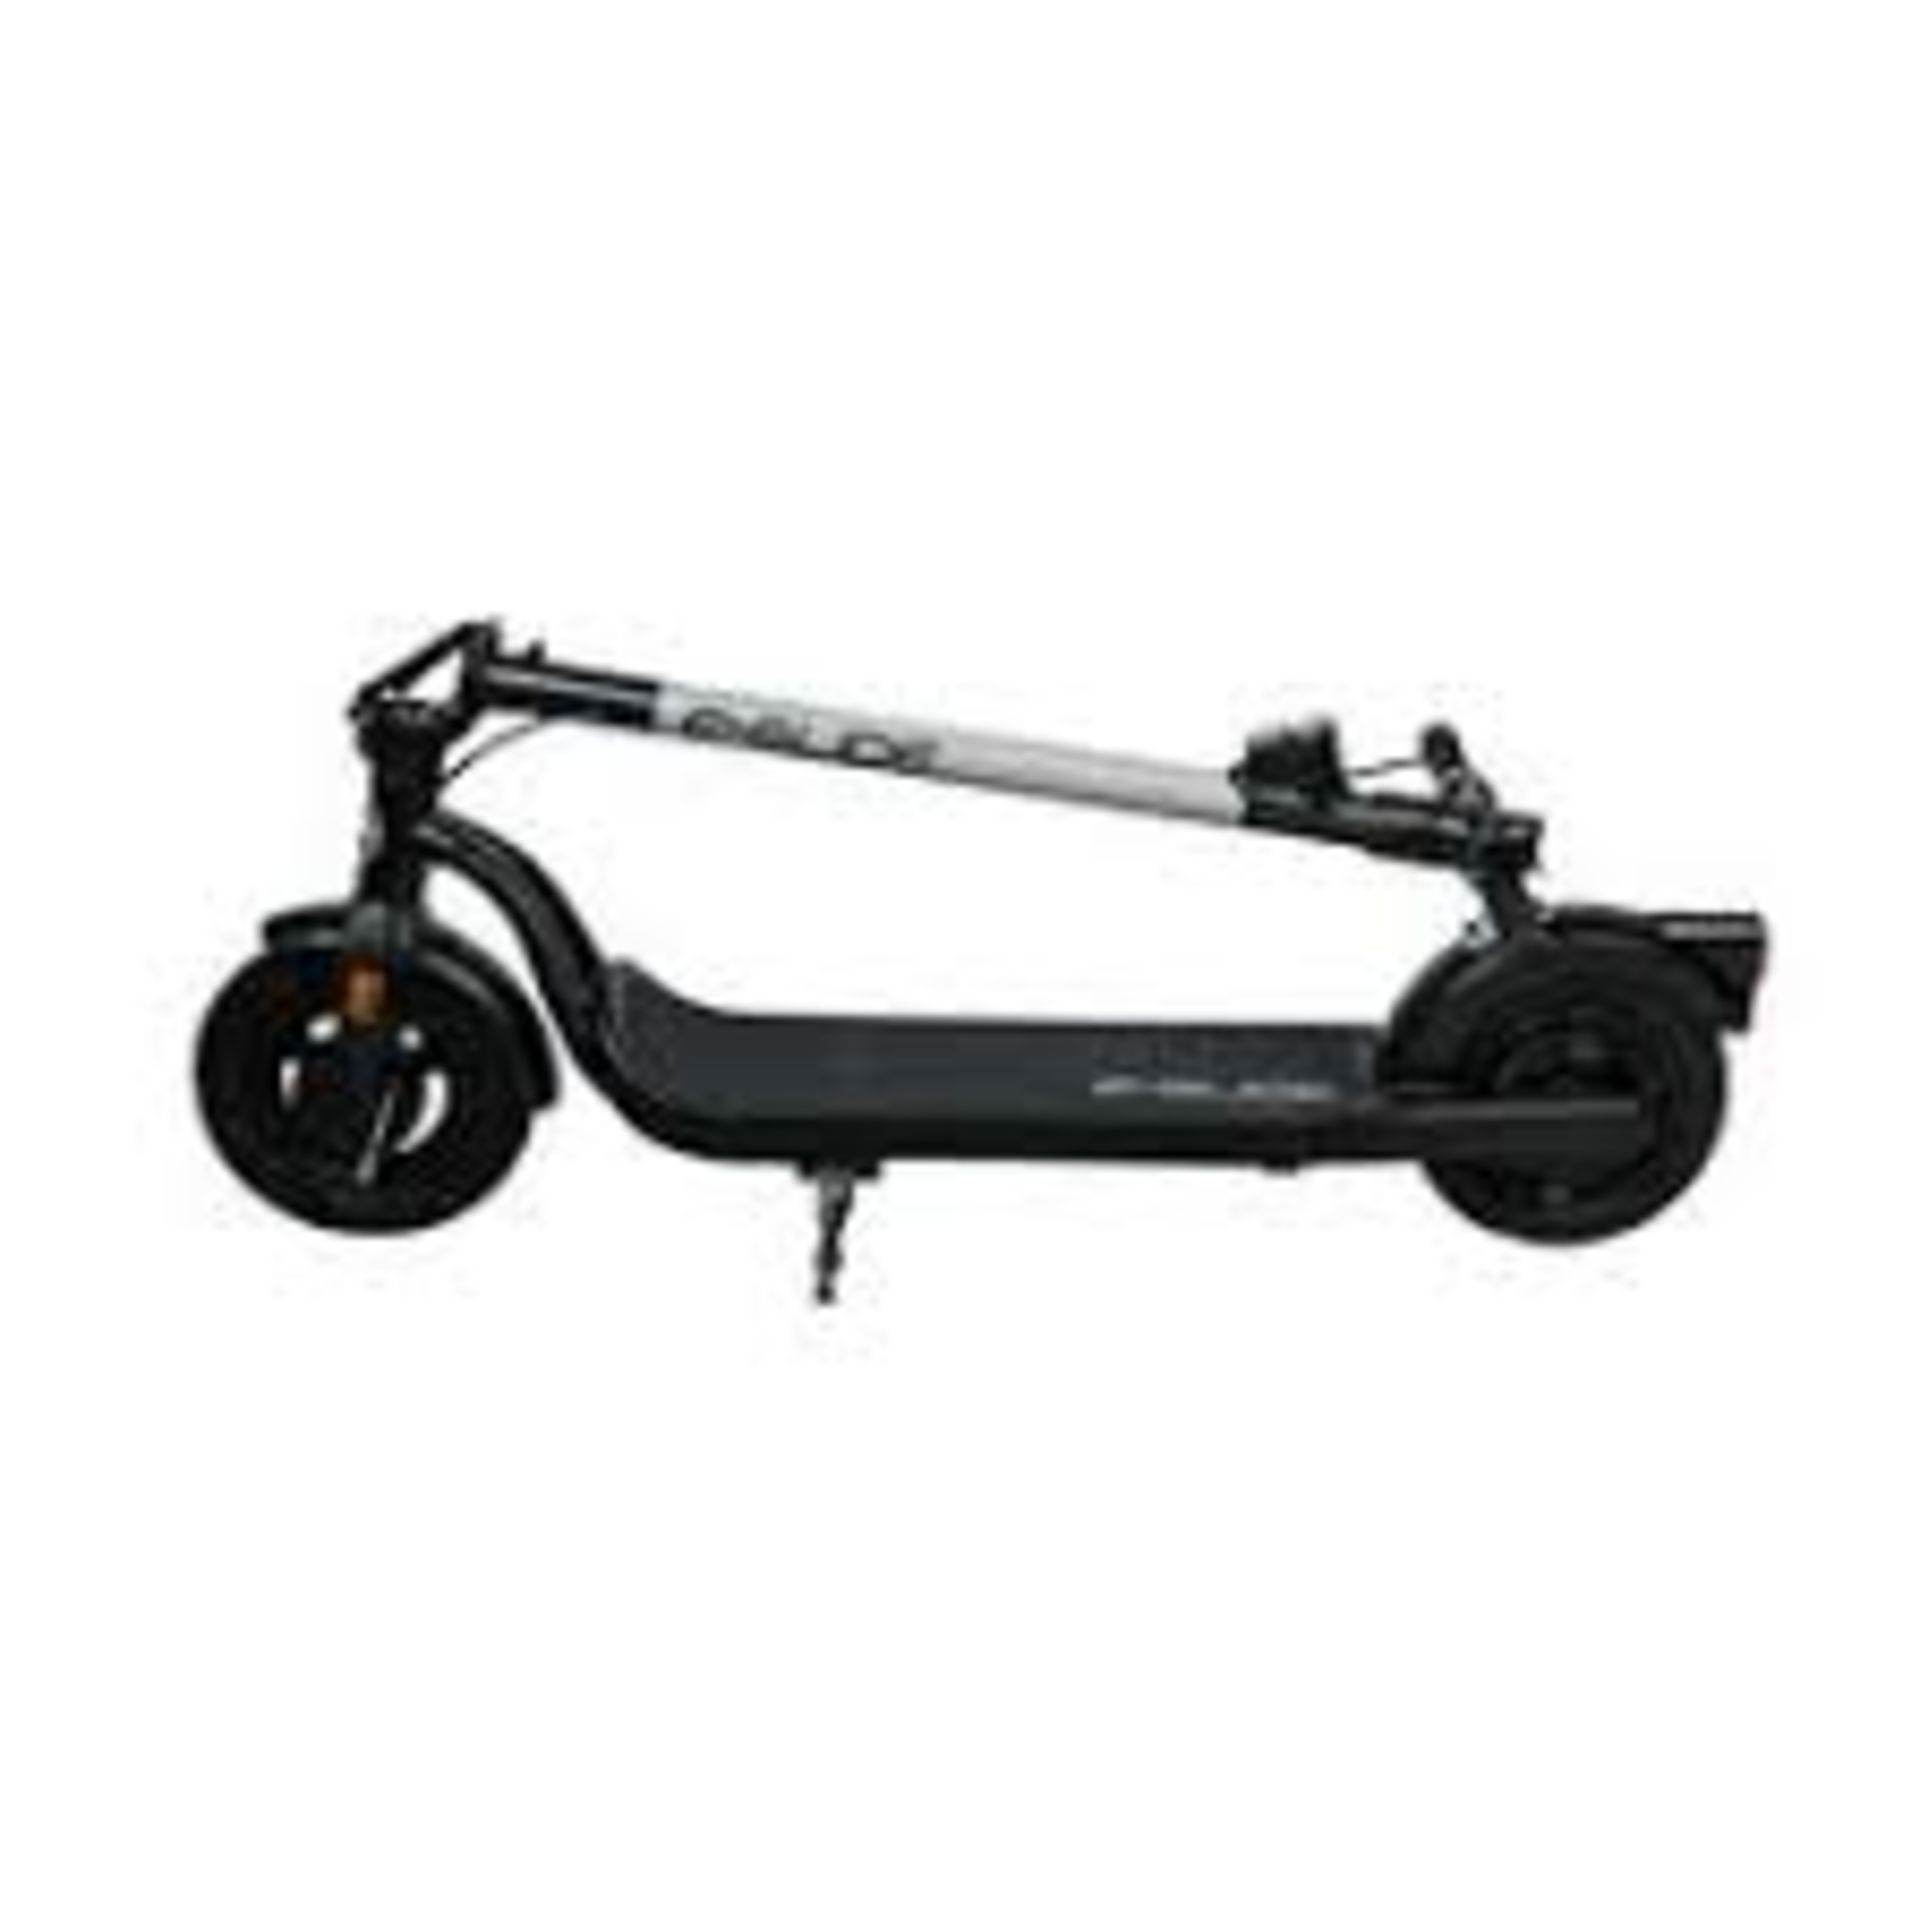 Trade Lot 4 x Brand New E-Glide V2 Electric Scooter Grey and Black RRP £599, Introducing a sleek and - Bild 2 aus 3